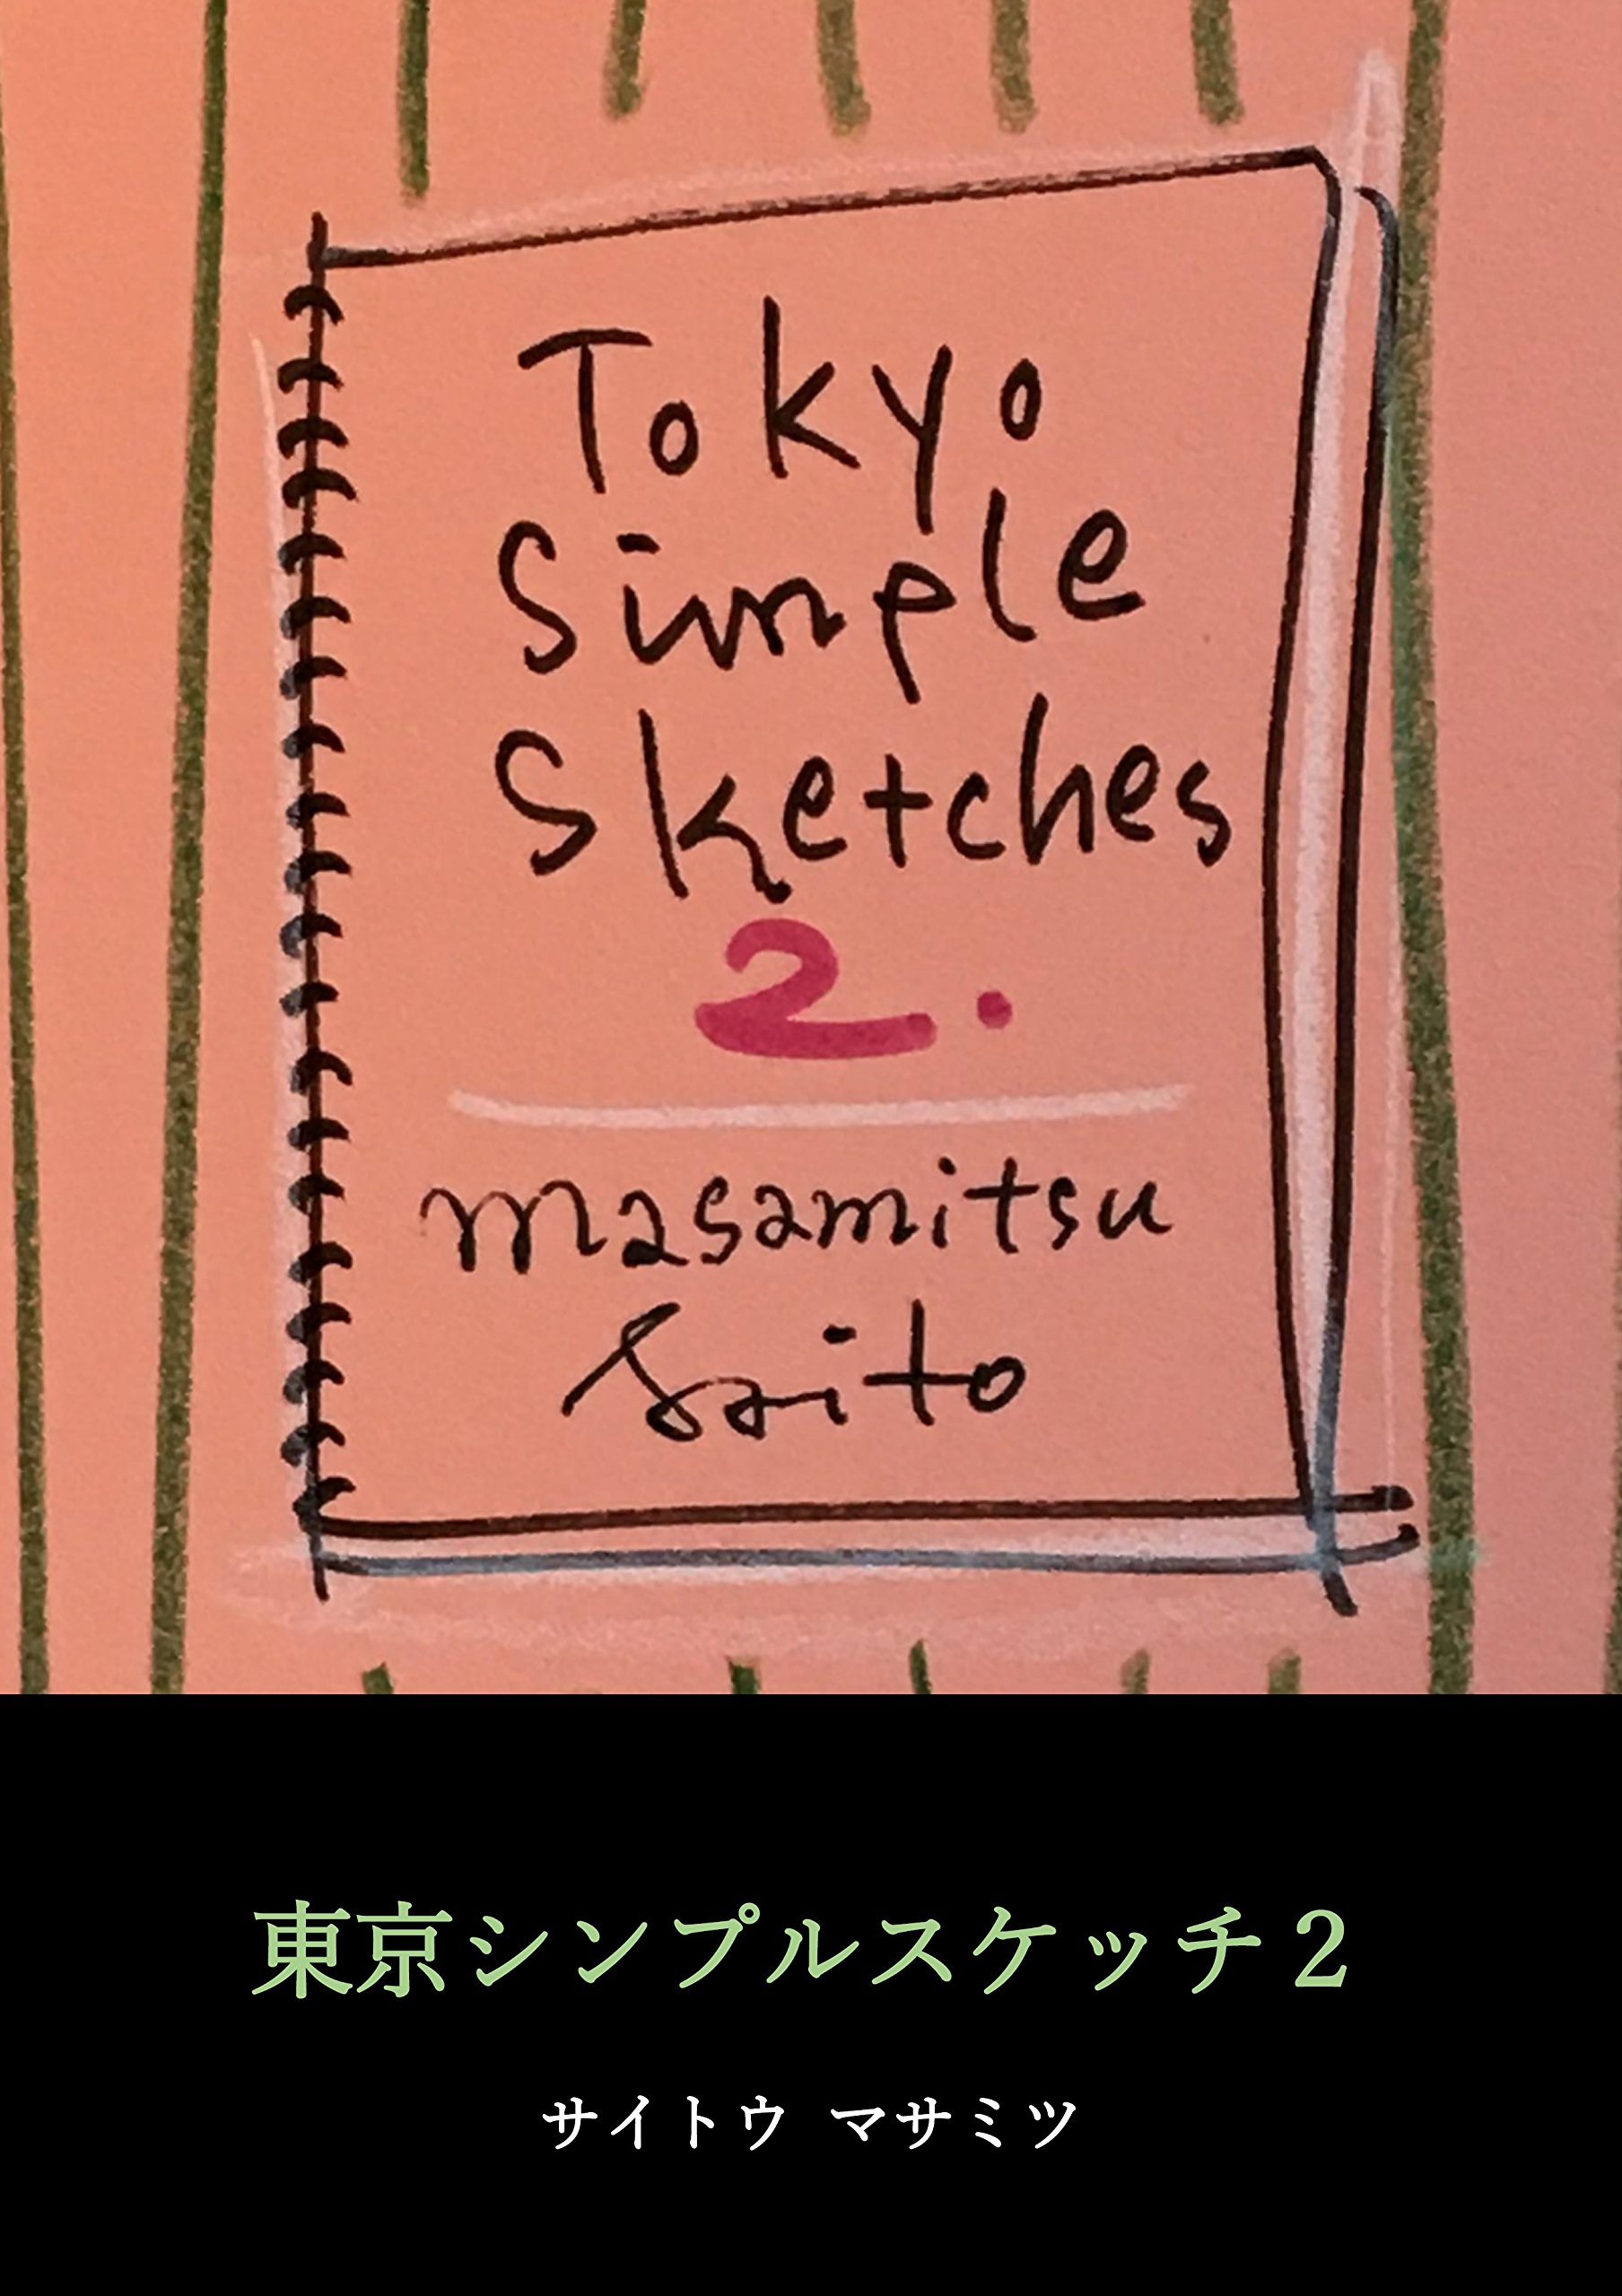 Tokyo Simple Sketches 2 (Simple Sketch Series) (Japanese Edition)